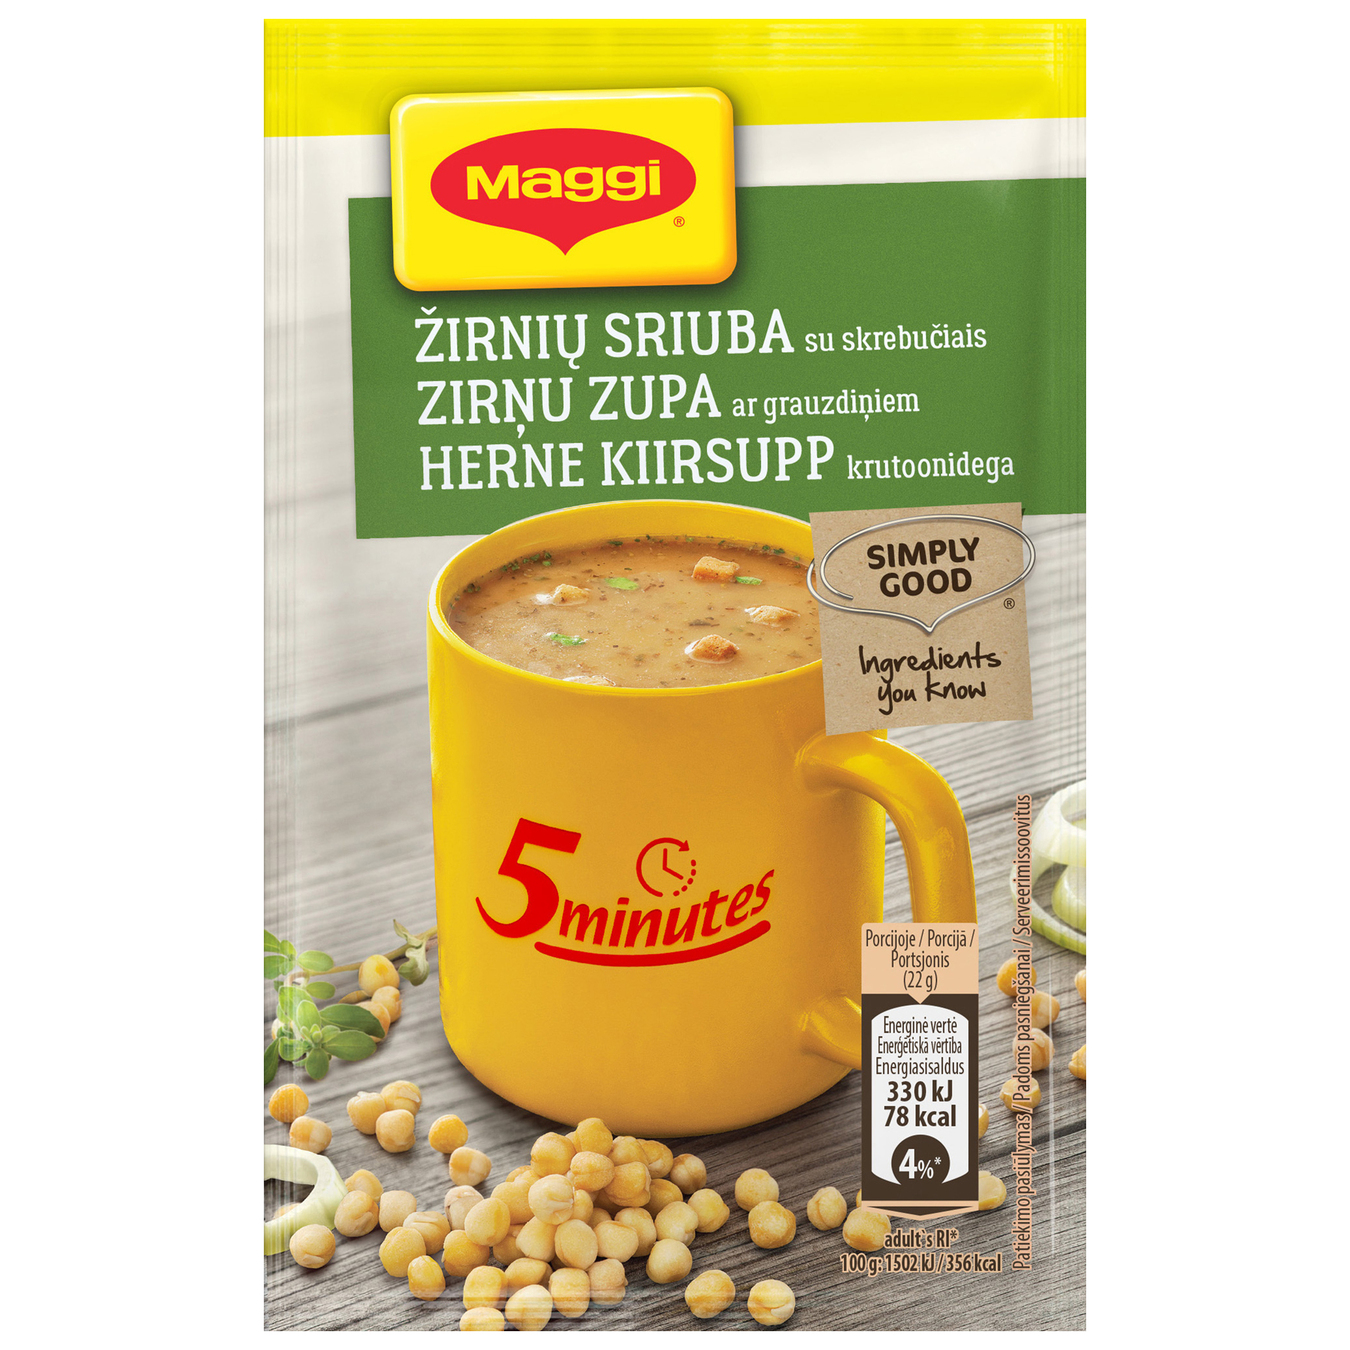 Maggi pea soup with instant croutons 22g